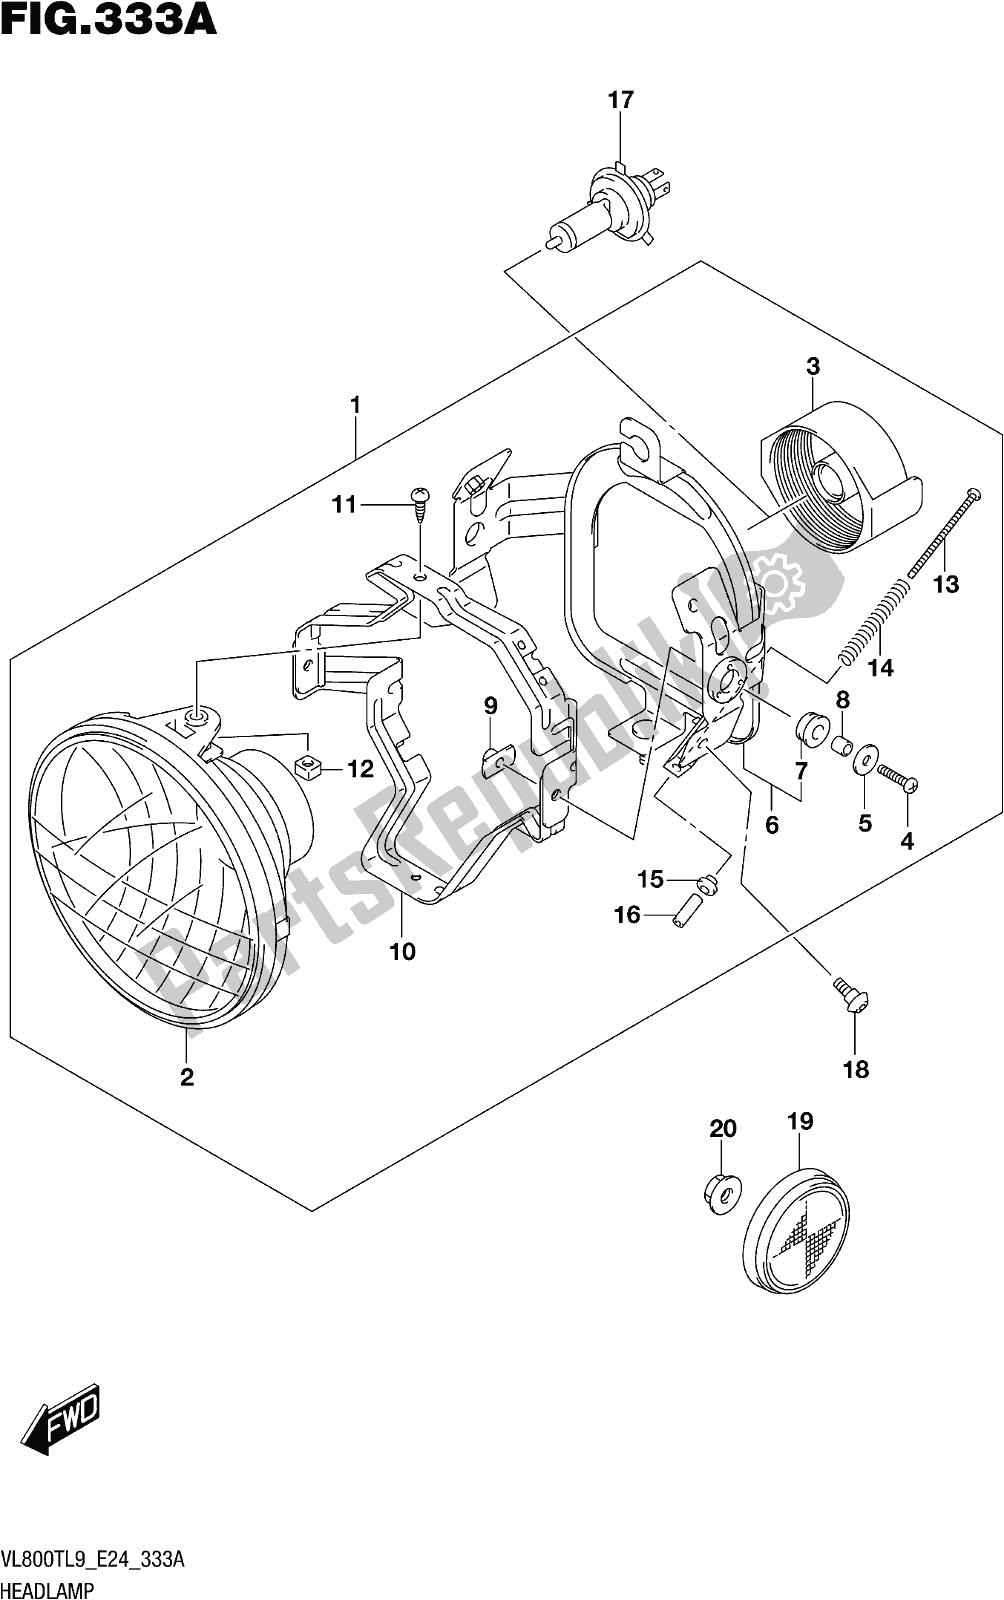 All parts for the Fig. 333a Headlamp of the Suzuki VL 800T 2019